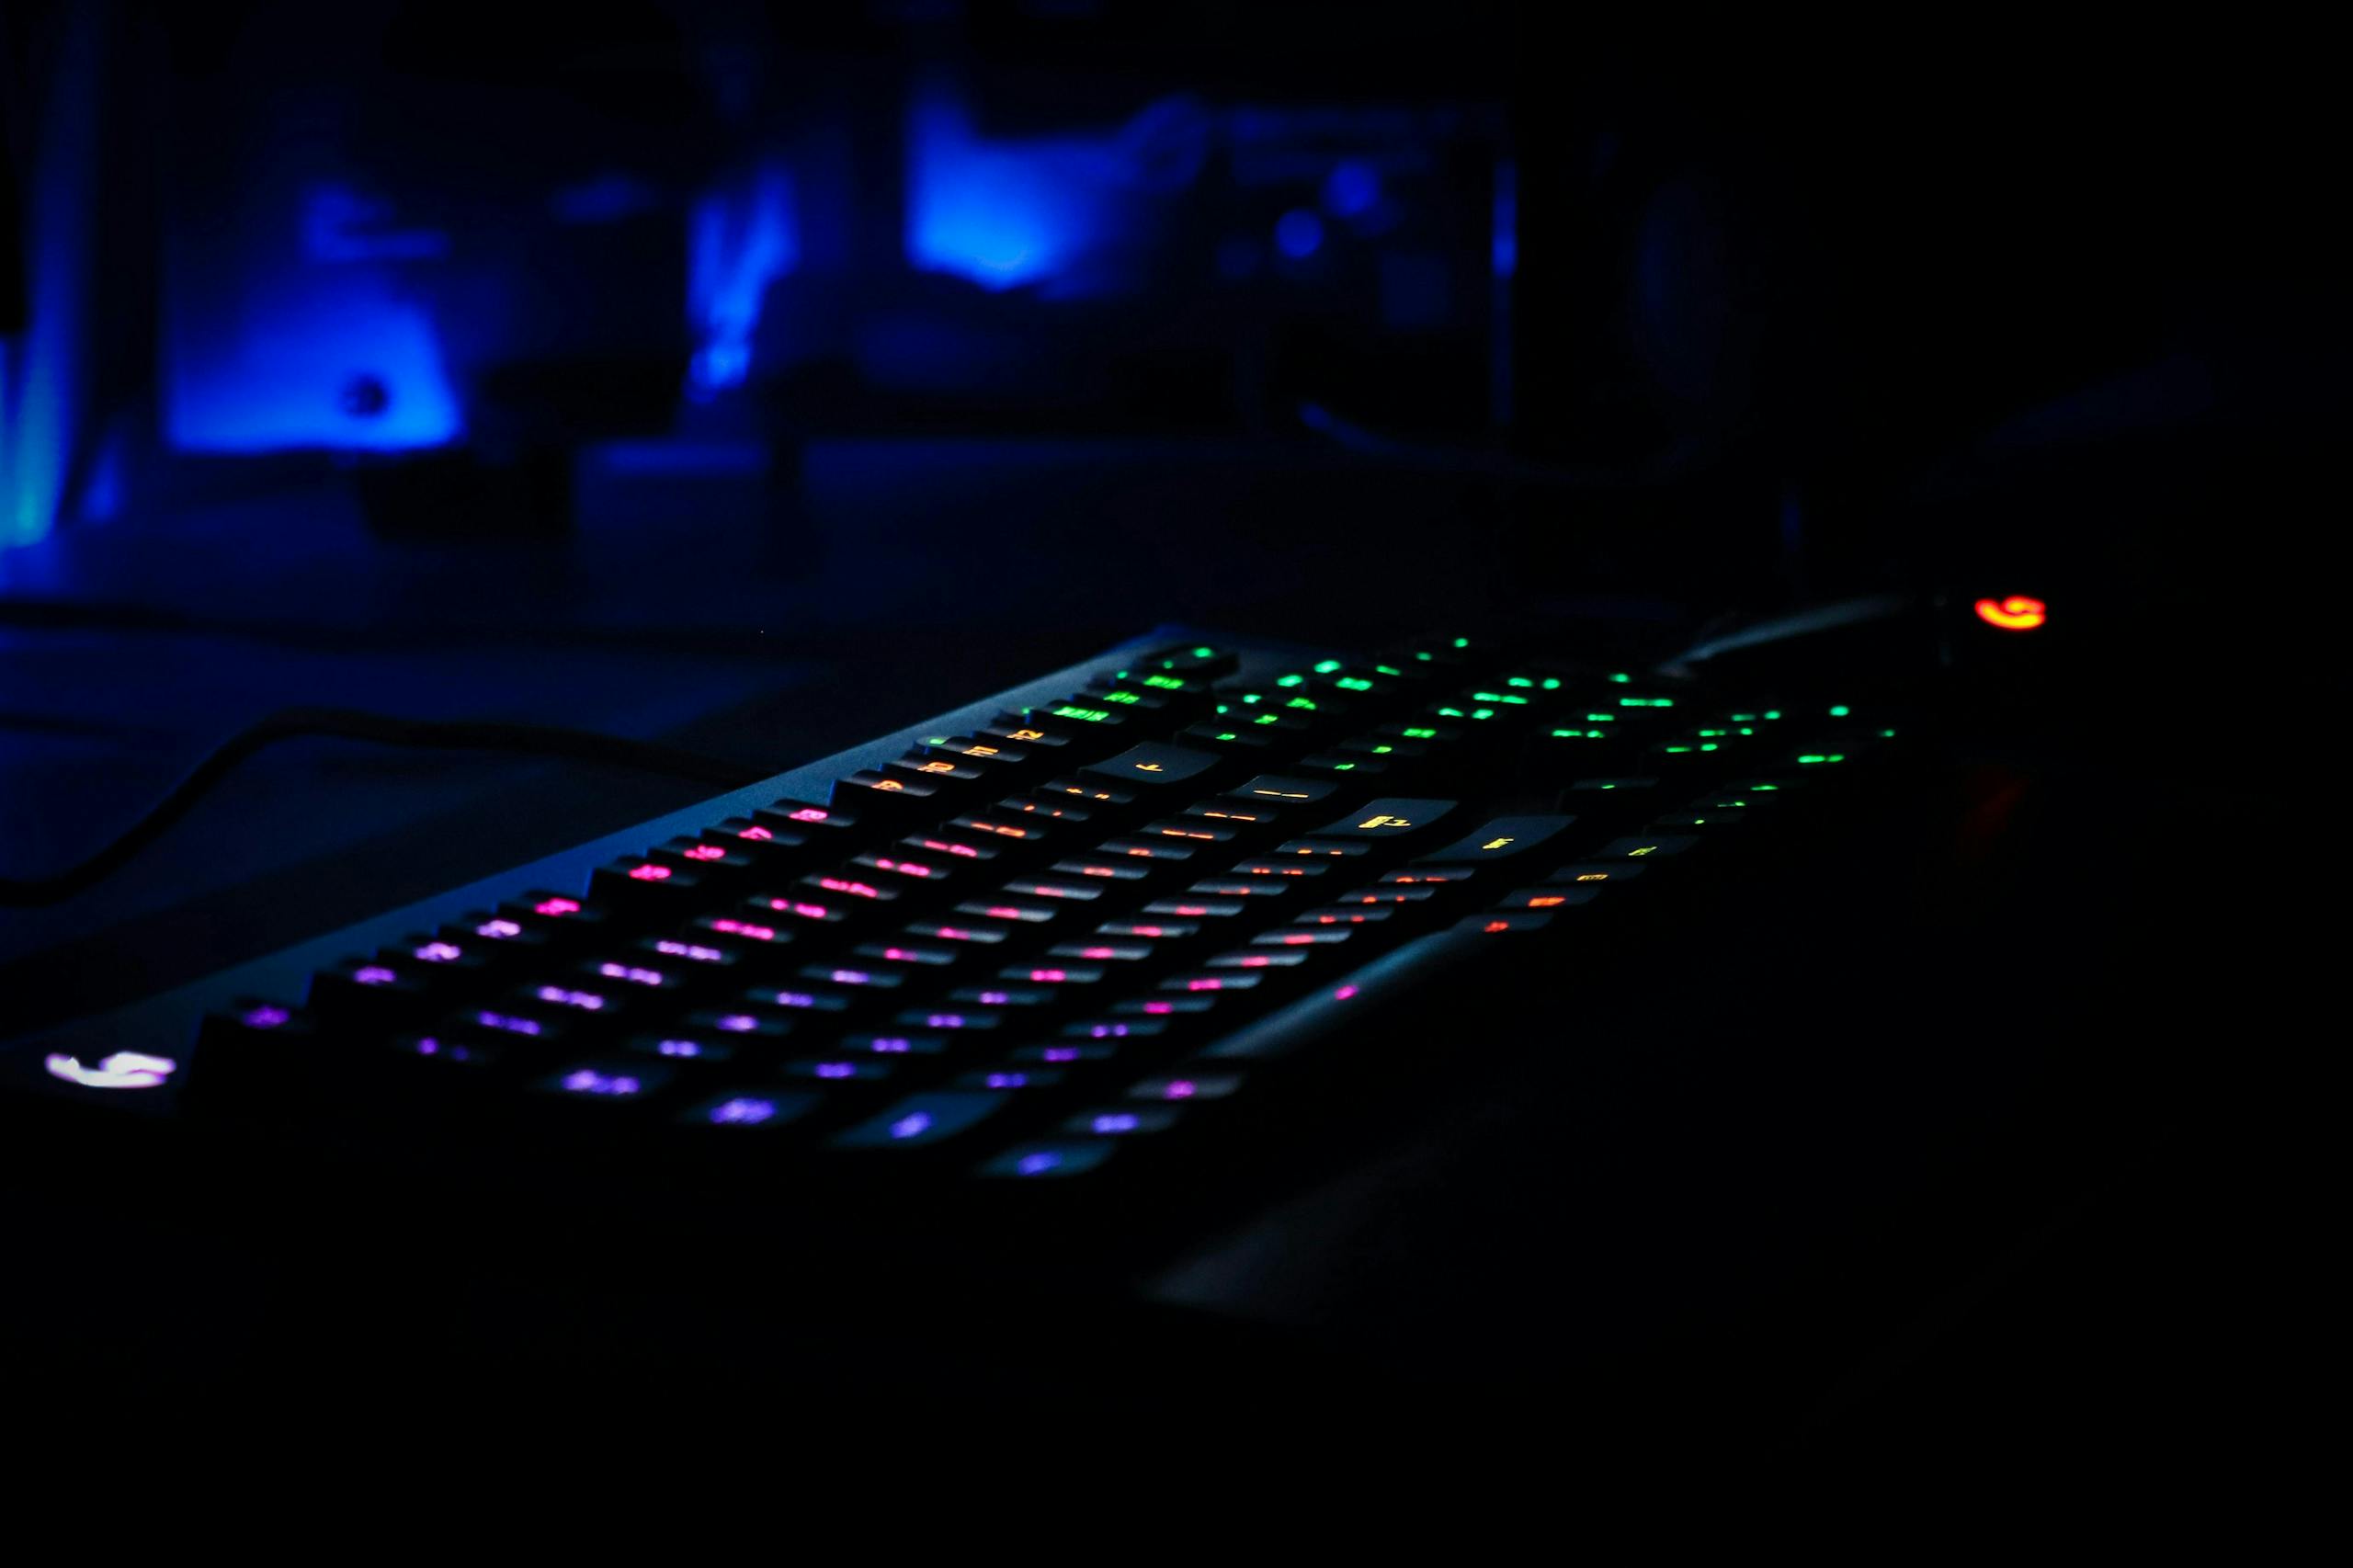 Colorful keyboard on a dark background